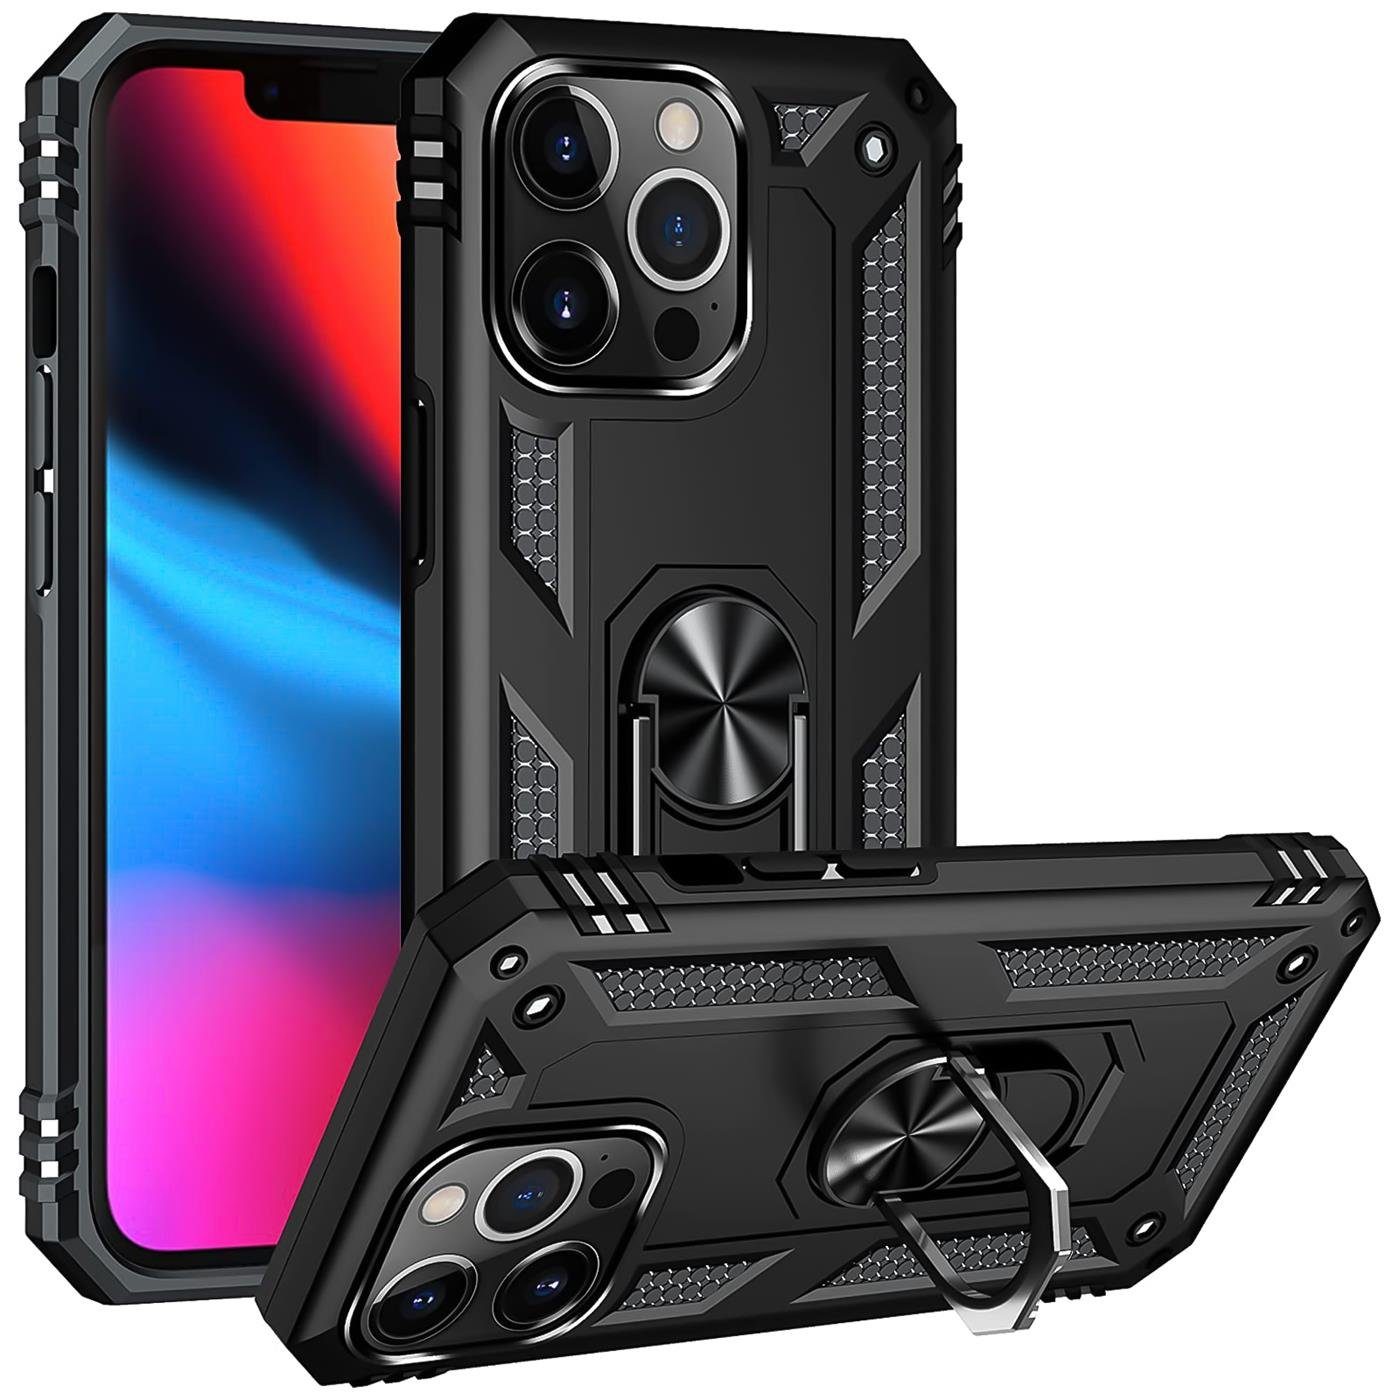 CoolGadget Handyhülle Armor Shield Case für Apple iPhone 13 Pro 6,1 Zoll,  Outdoor Cover mit Magnet Ringhalterung Handy Hülle für iPhone 13 Pro